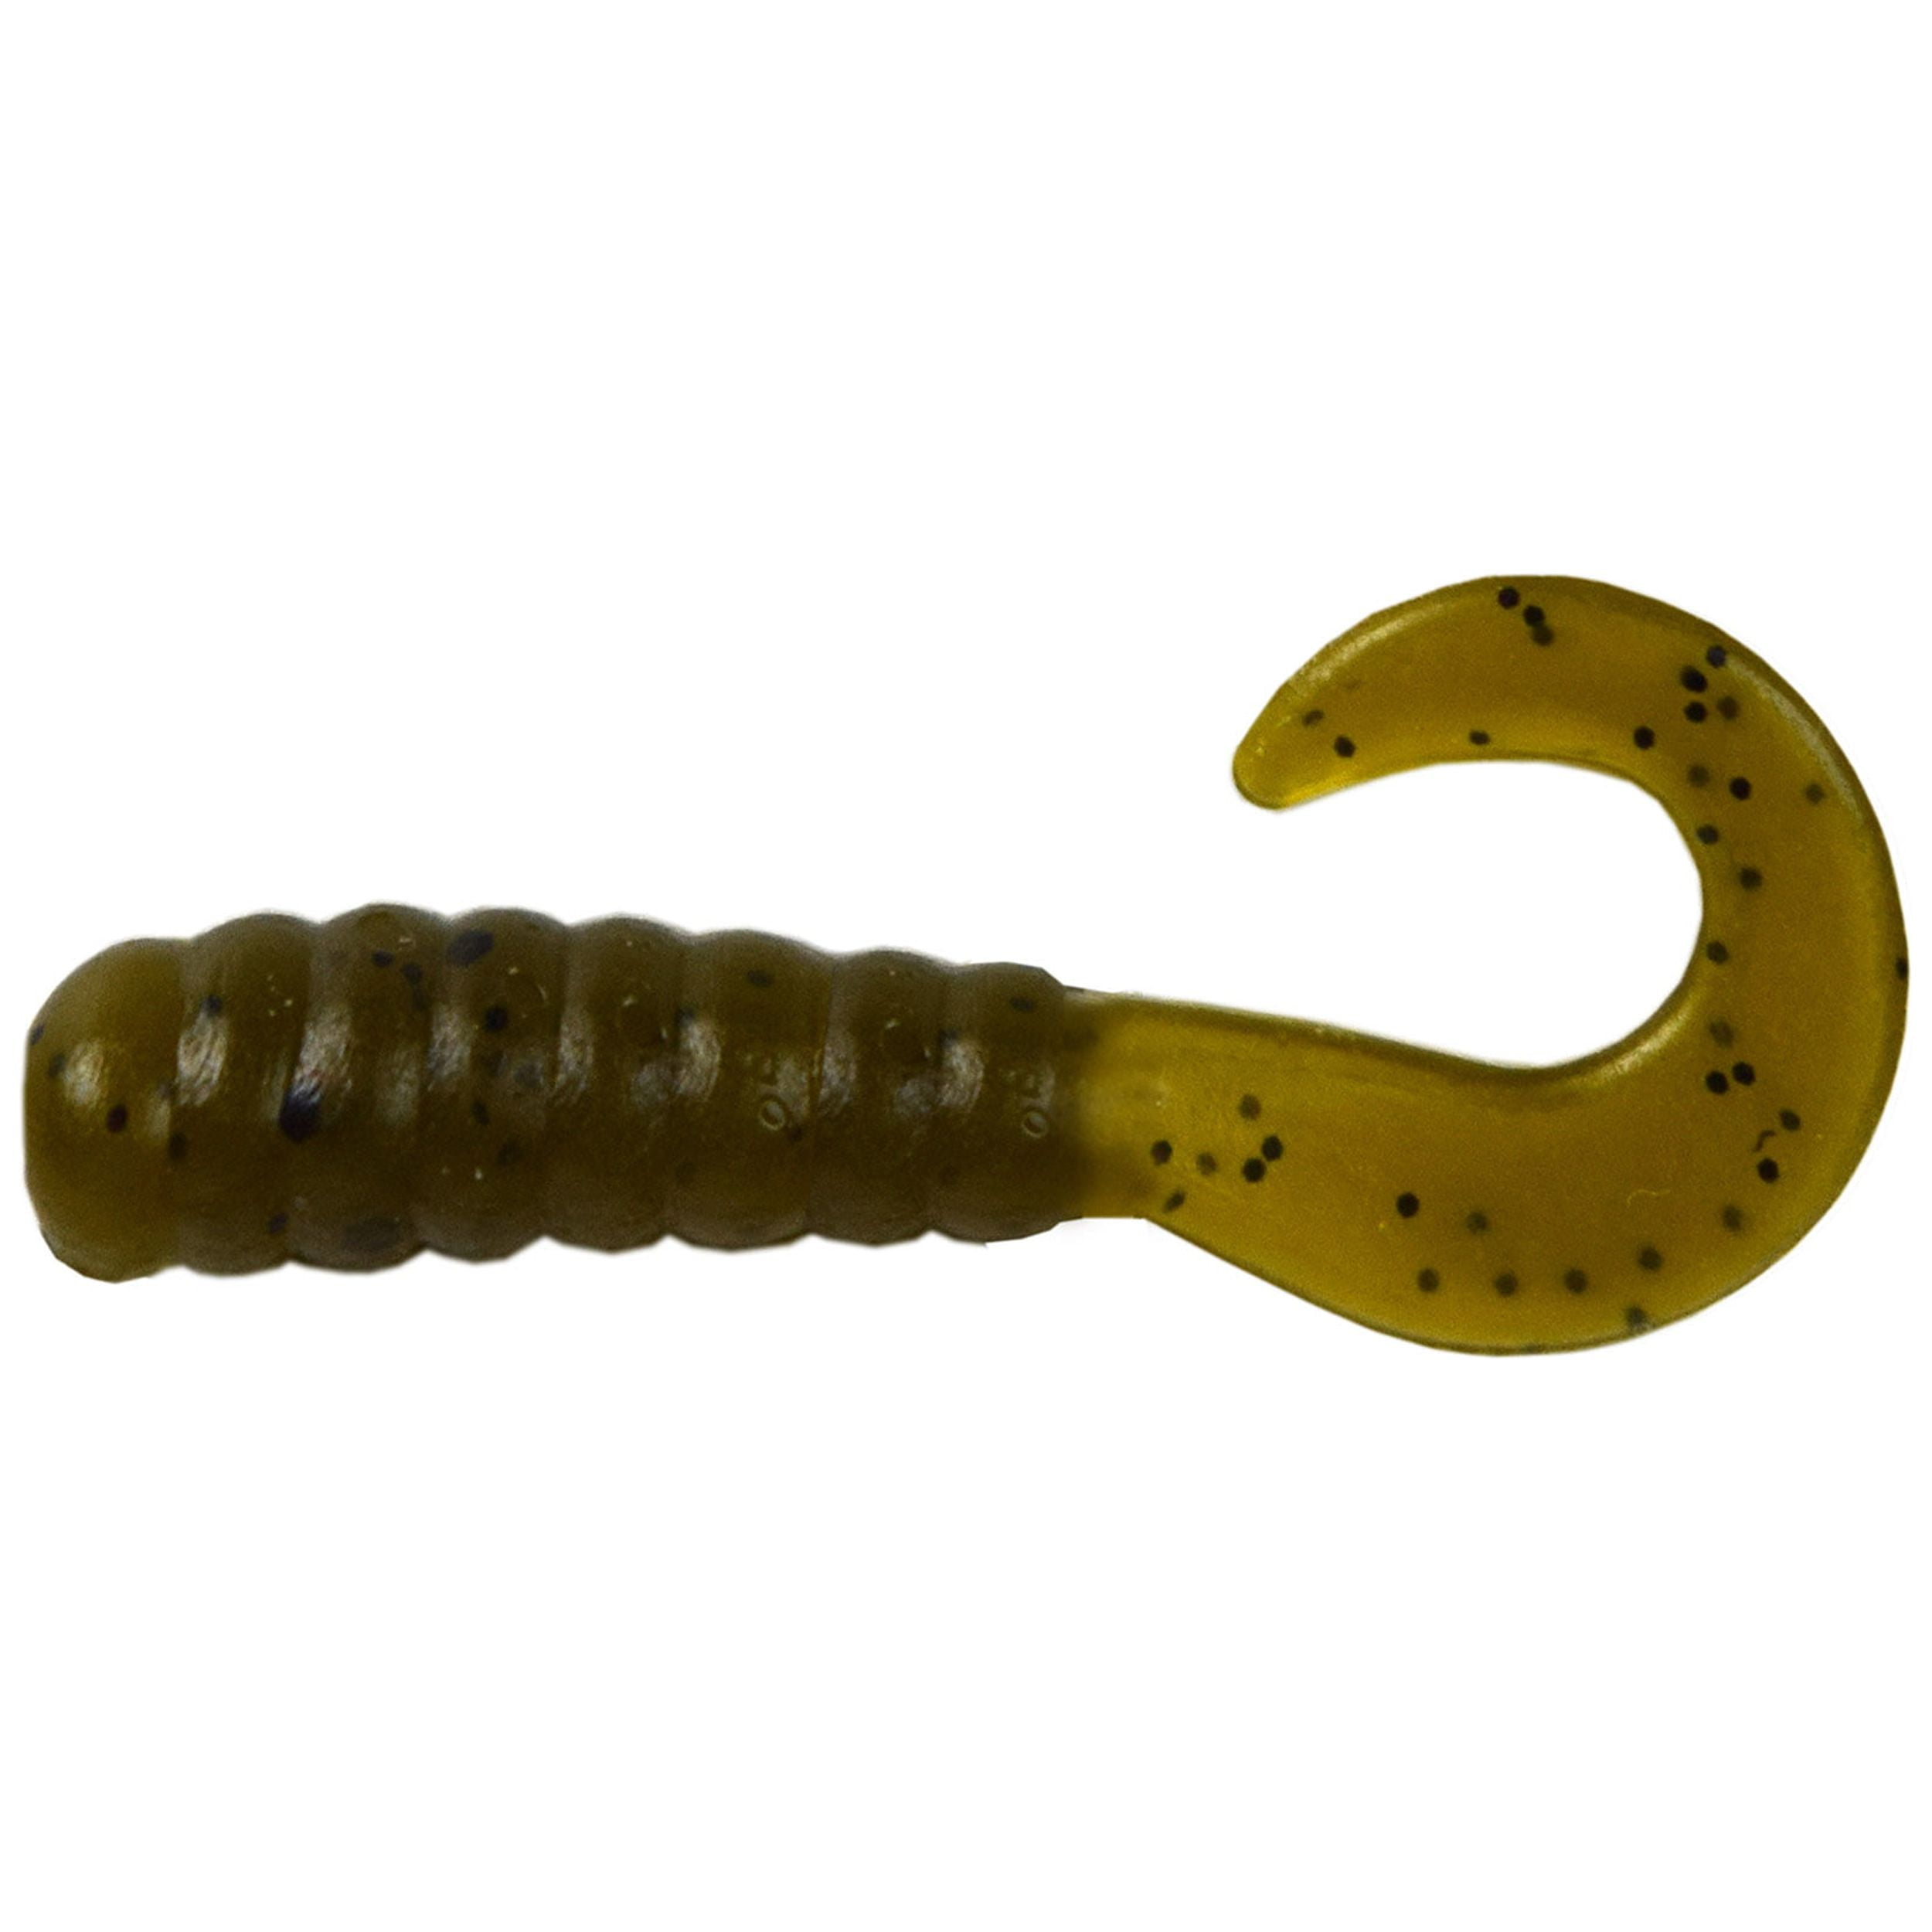 Tackle HD 100-Pack Grub Fishing Lures, 2-Inch Skirted Grub with Curly Tail,  Bulk Fishing Grubs for Crappie, Bass, Walleye, or Trout Bait, Freshwater or  Saltwater Swimbait, Pumpkinseed 